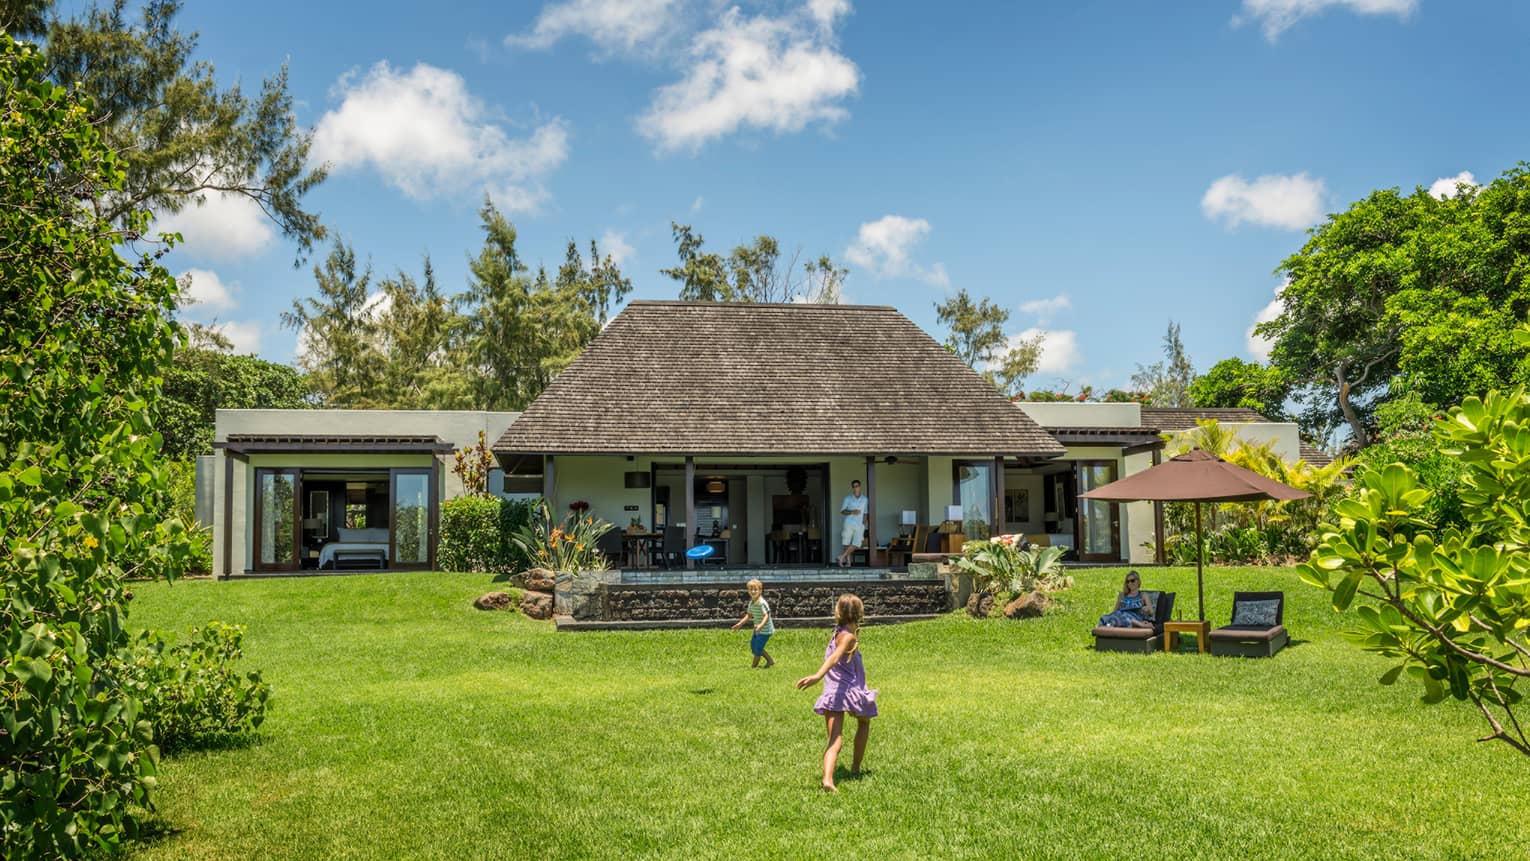 Young children play on green lawn in front of bungalow as dad watches from covered patio